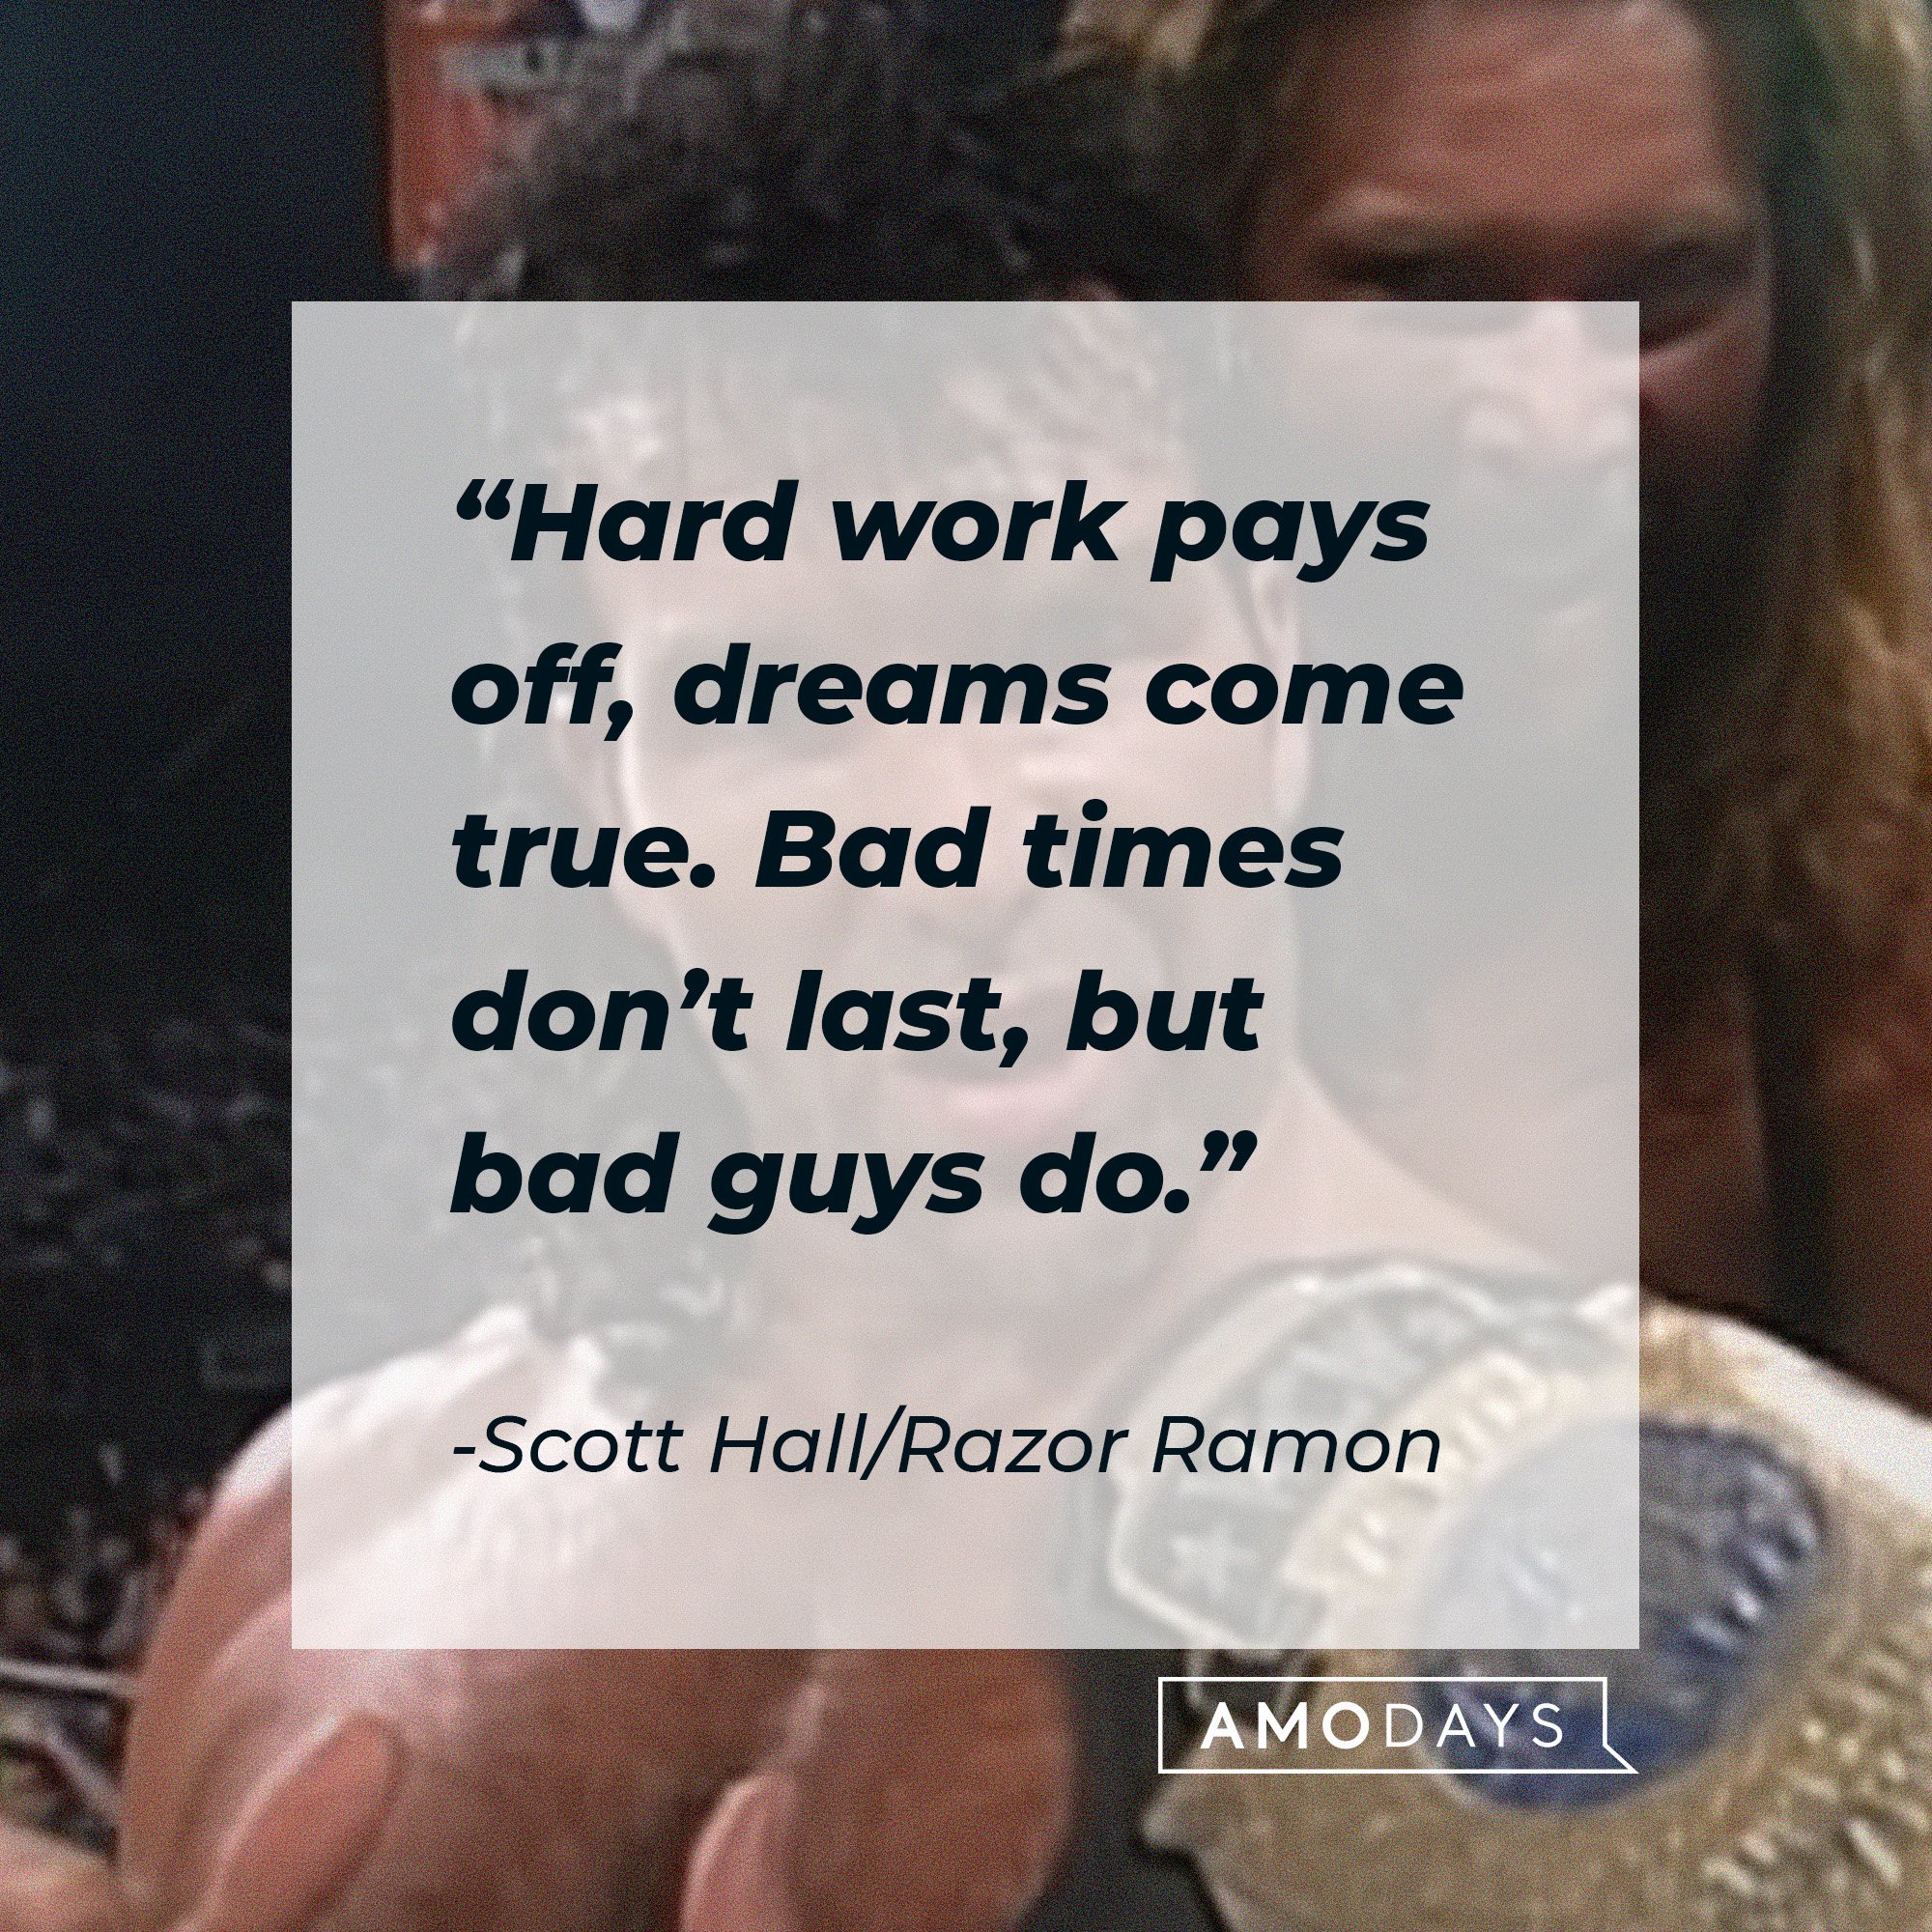 Scott Hall/Razor Ramon’s quote: "Hard work pays off, dreams come true. Bad times don't last, but bad guys do." | Image: AmoDays